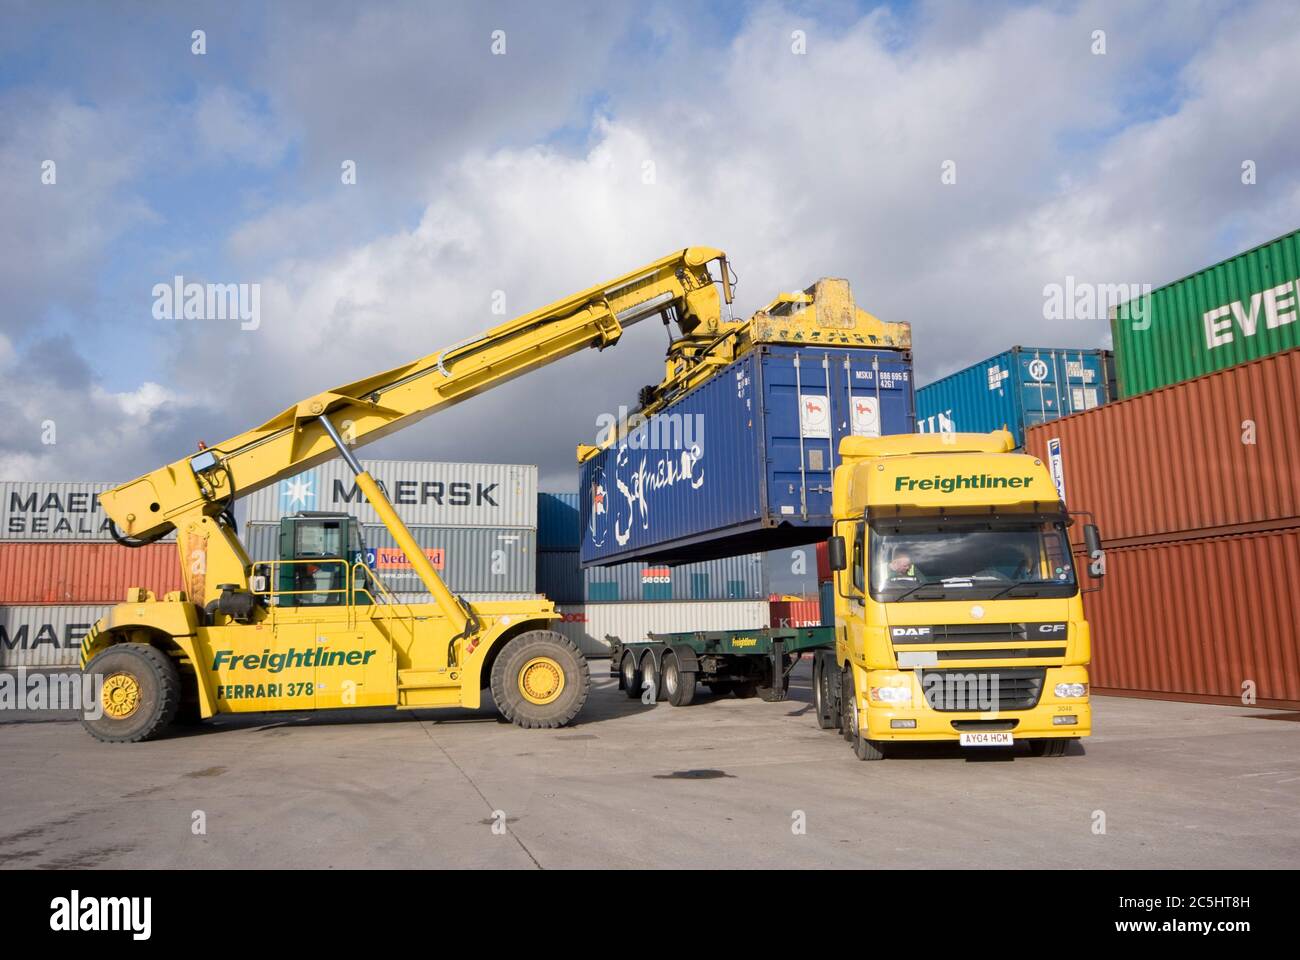 CVS Ferrari reach stacker being used to move shipping containers at Manchester Euroterminal, Trafford Park, Manchester, England. Stock Photo